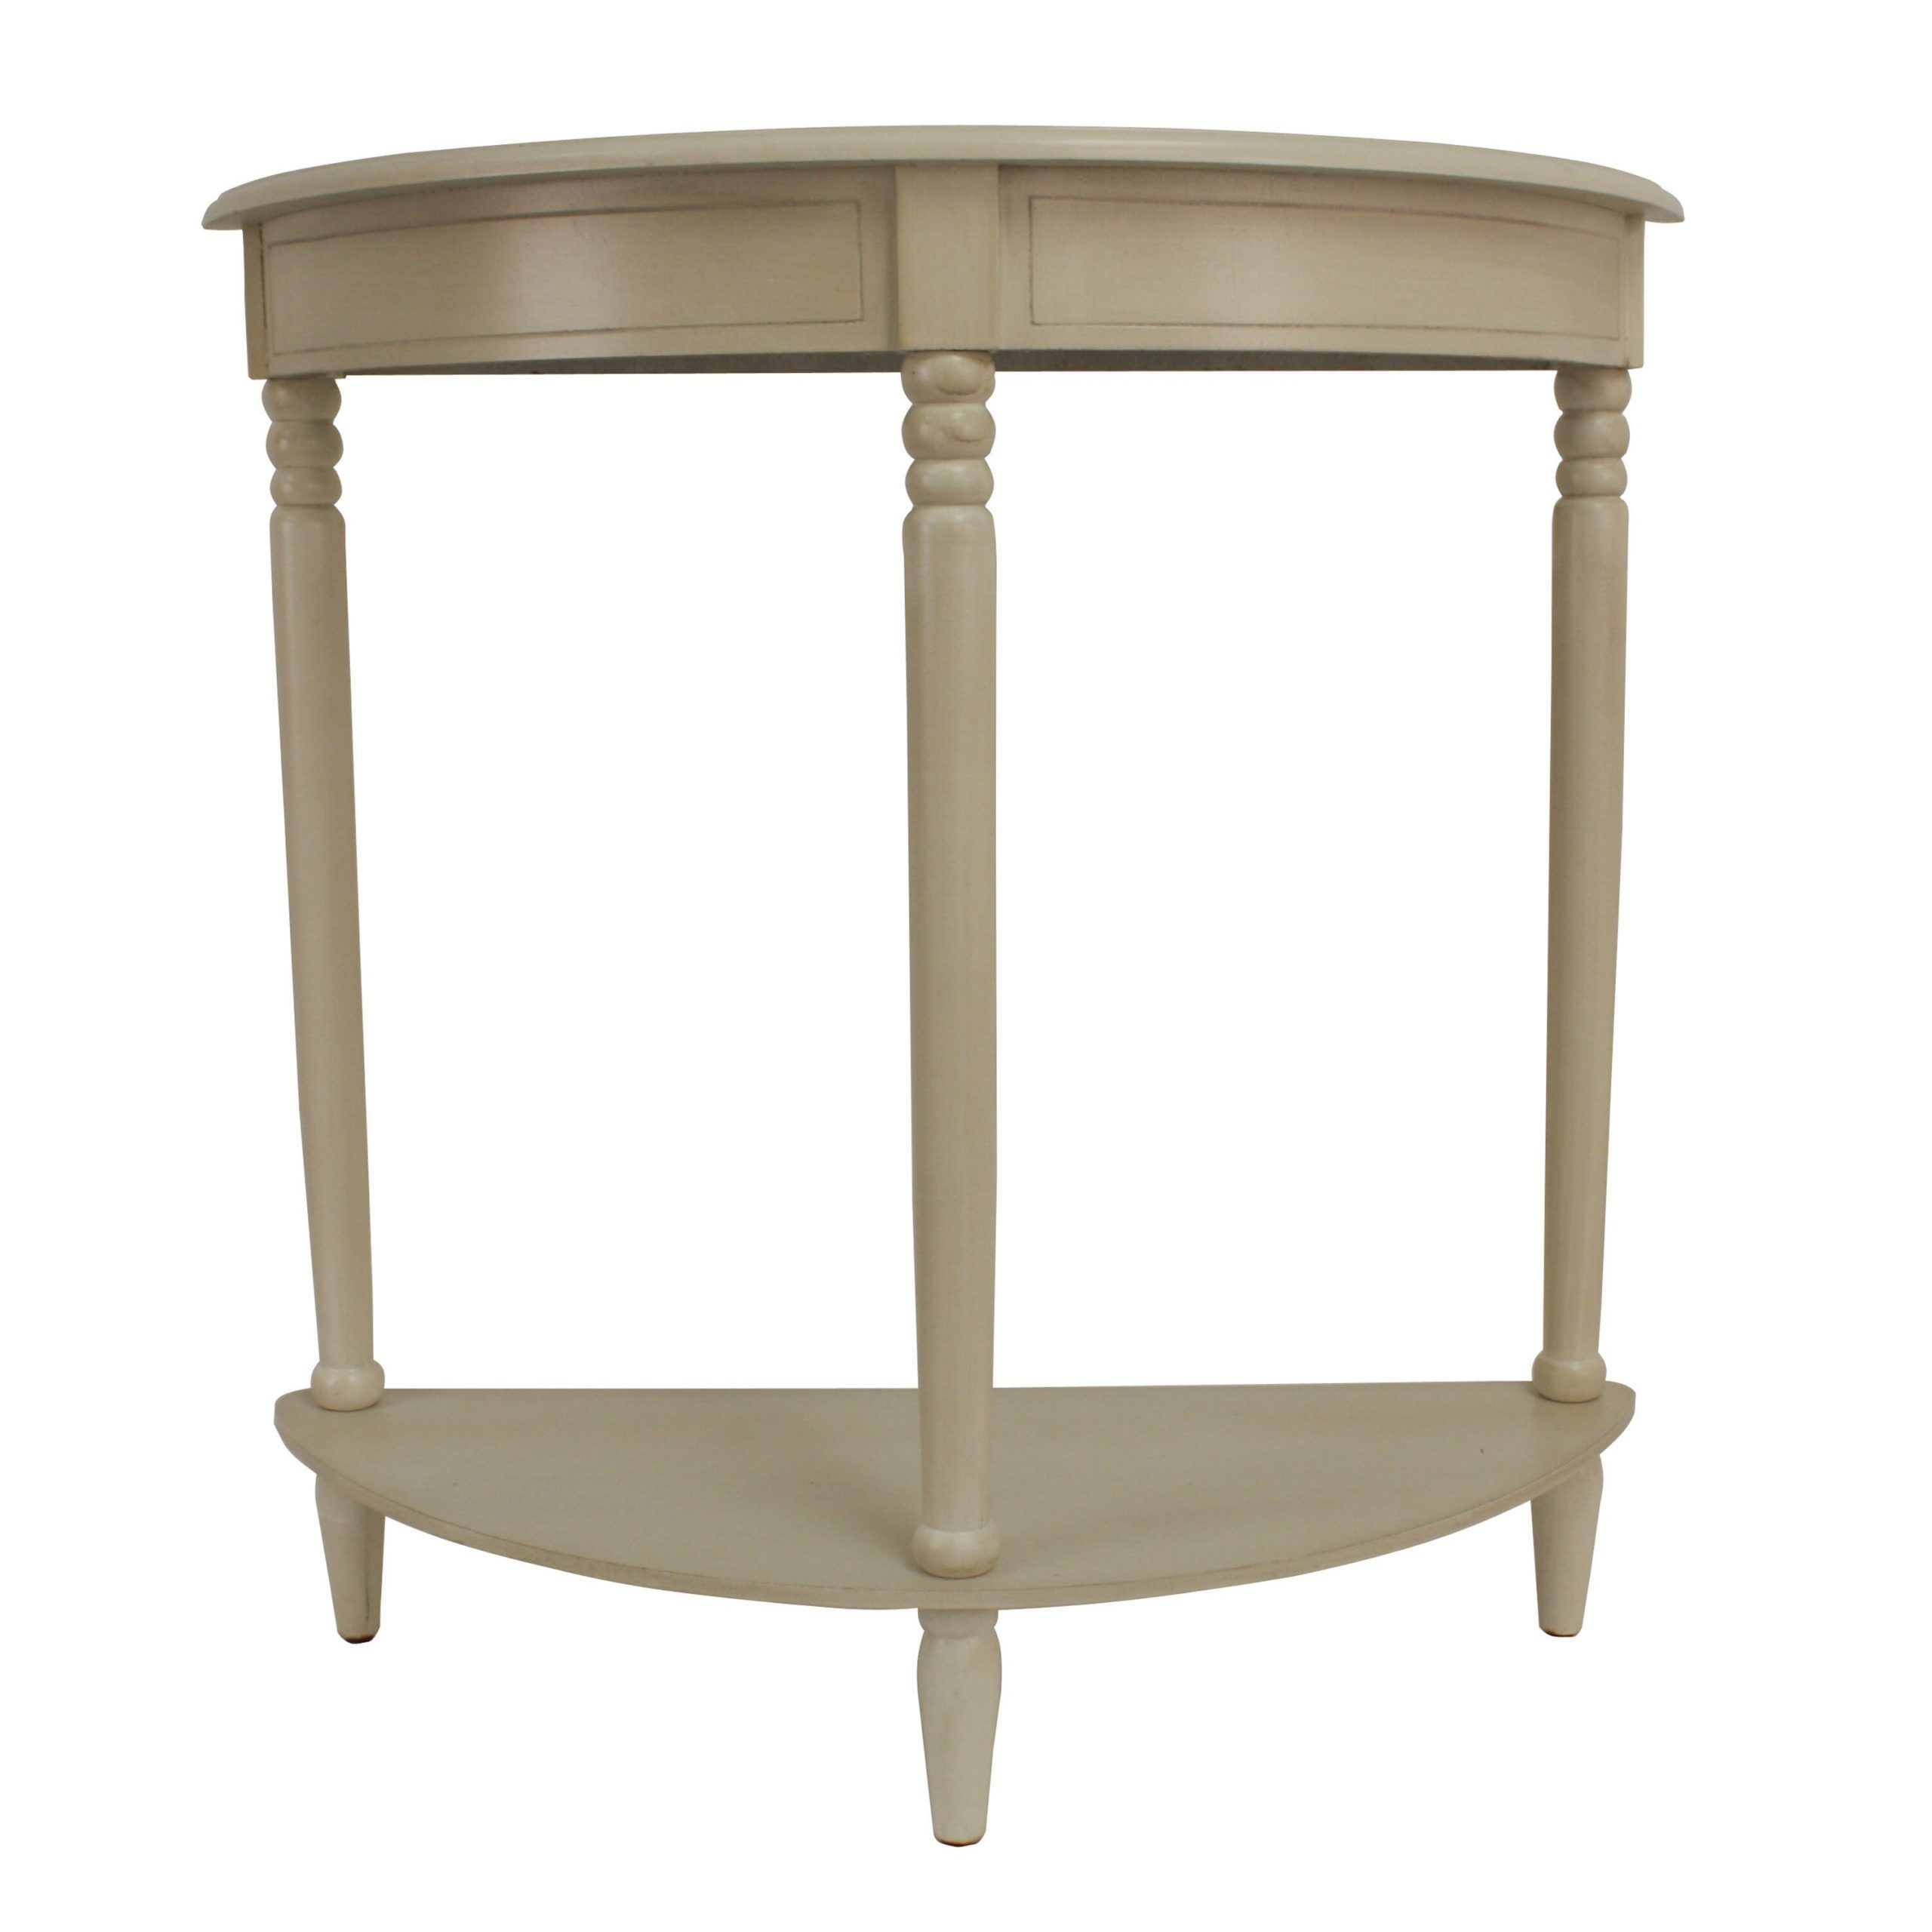 Decor Therapy Simplicity Half Moon Console Table & Reviews | Wayfair Throughout Round Console Tables (View 8 of 20)